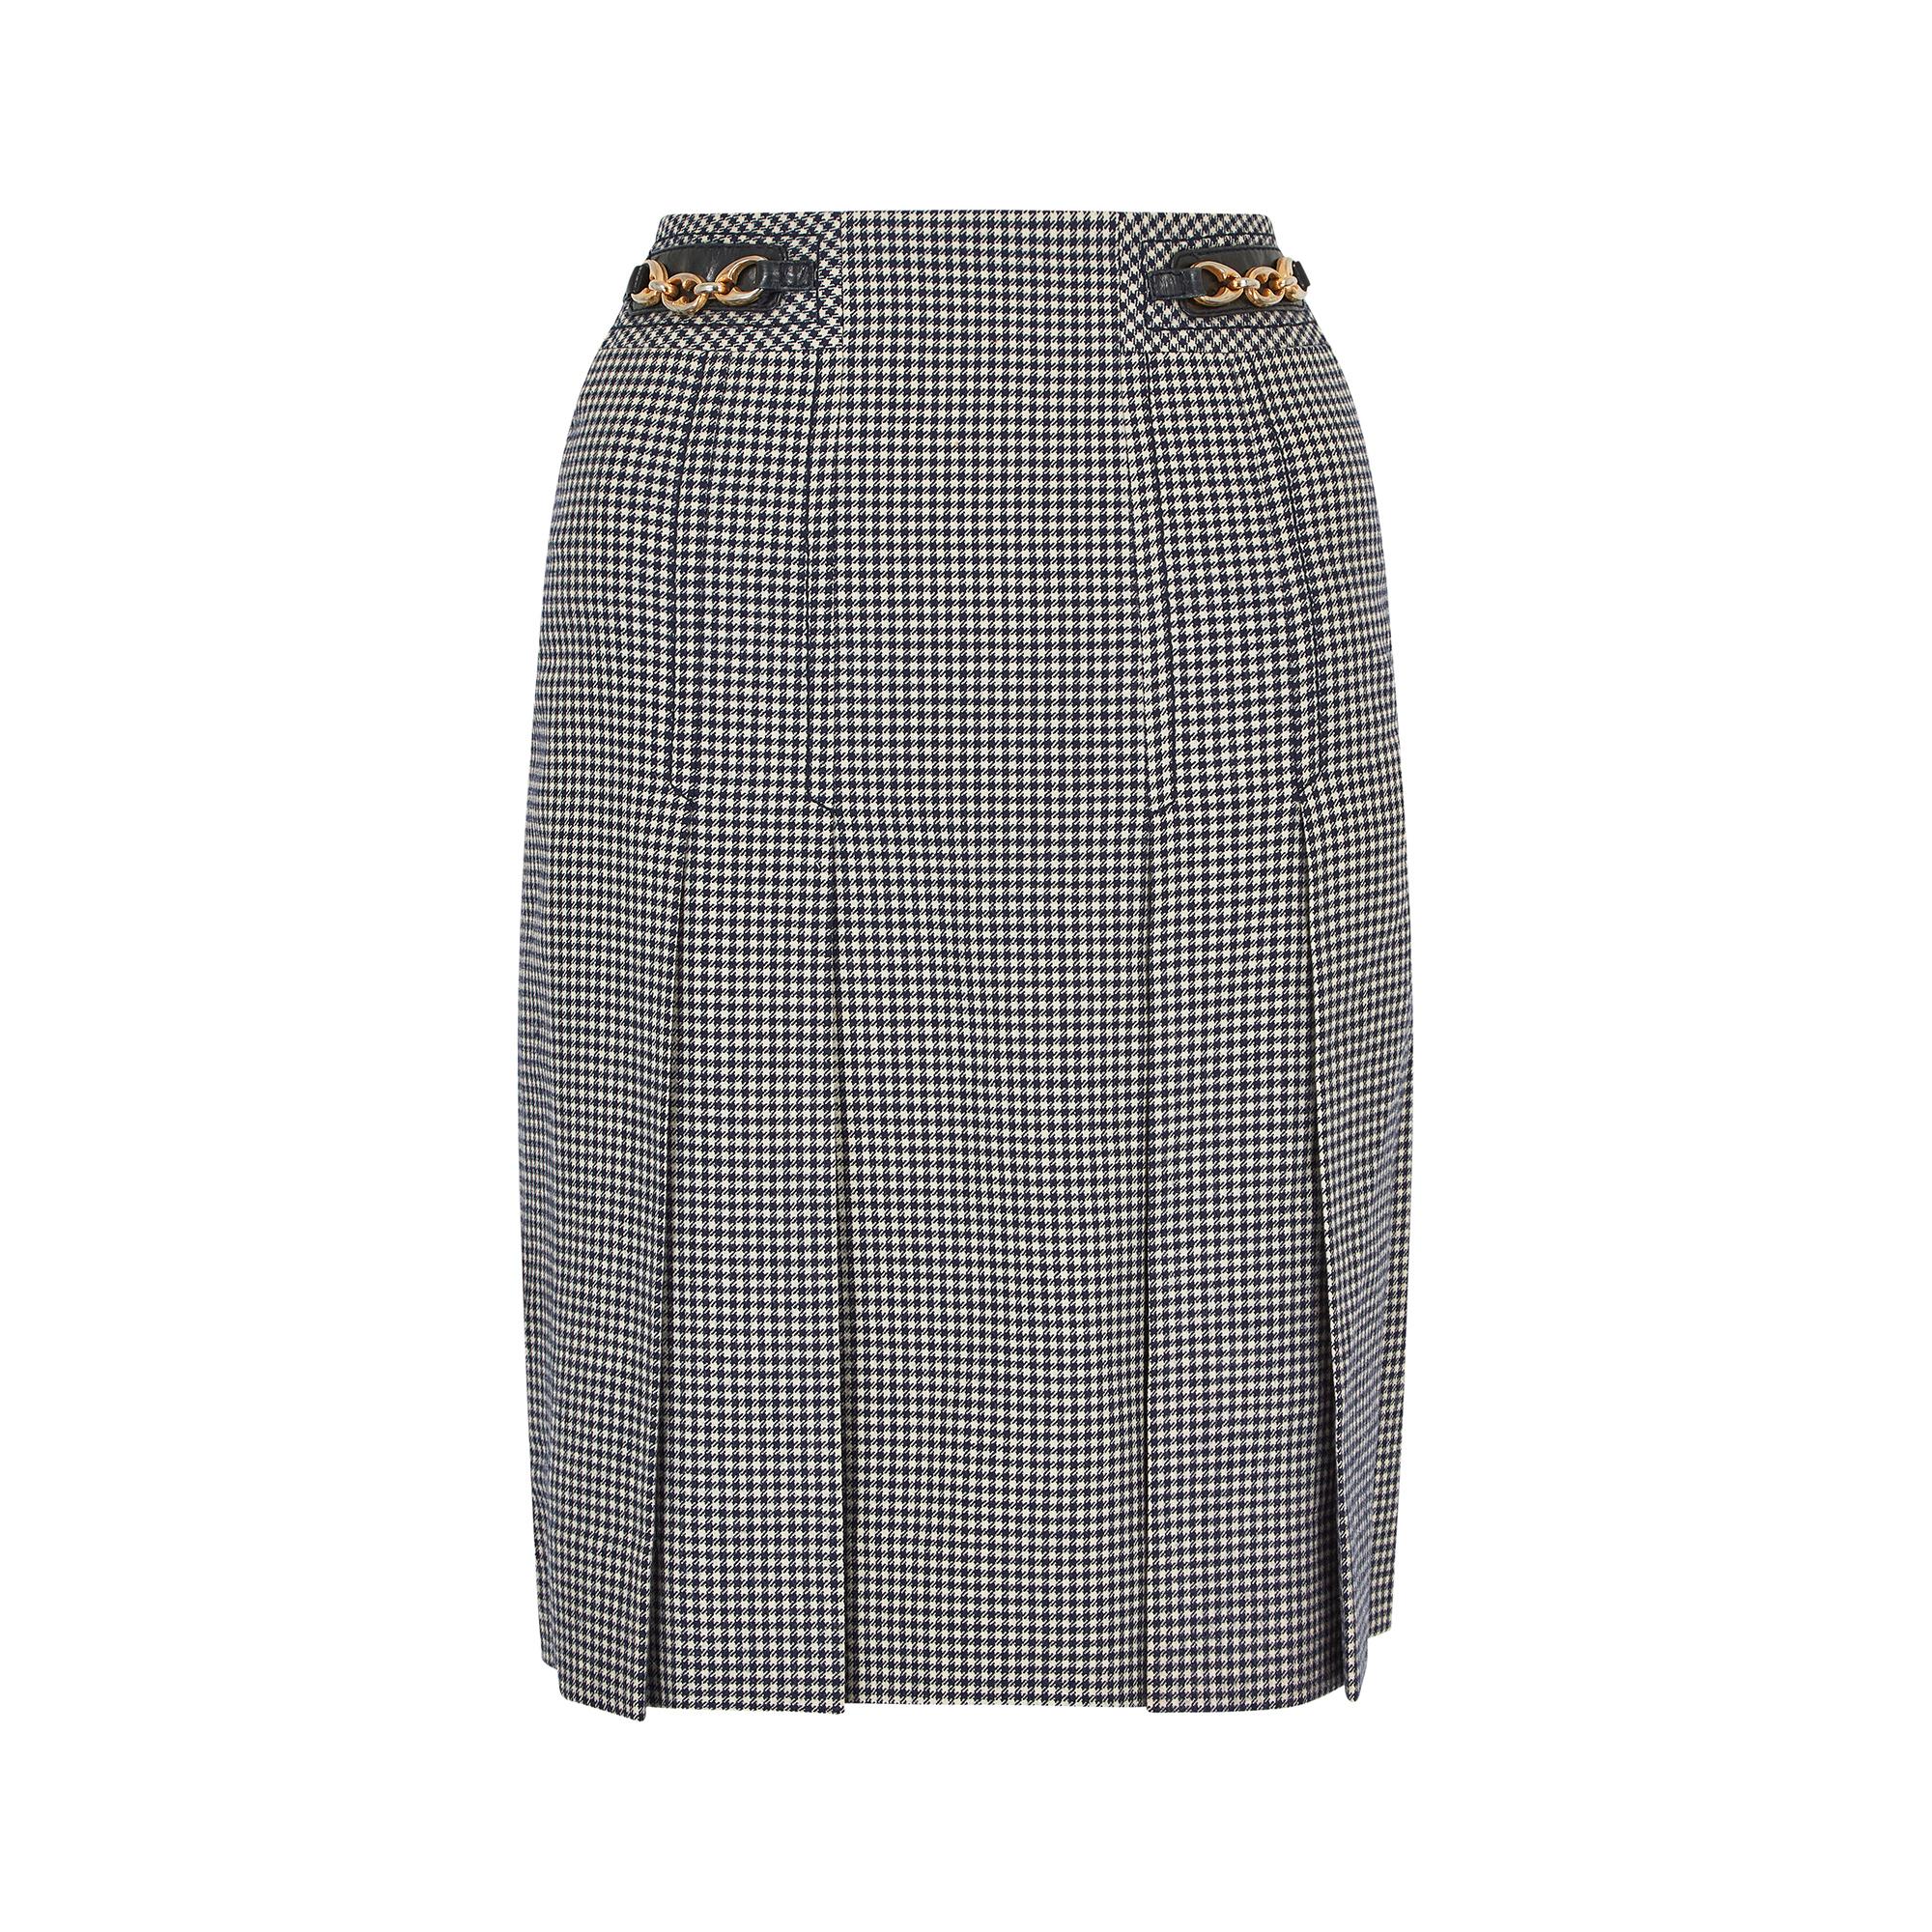 Early 1970s Celine 100% wool classic box pleat skirt.  This is a high-waisted navy and white houndstooth design with navy calfskin leather and gold tone chain link gourmette either side of the waist band.  Fully lined in a quality navy acetate and